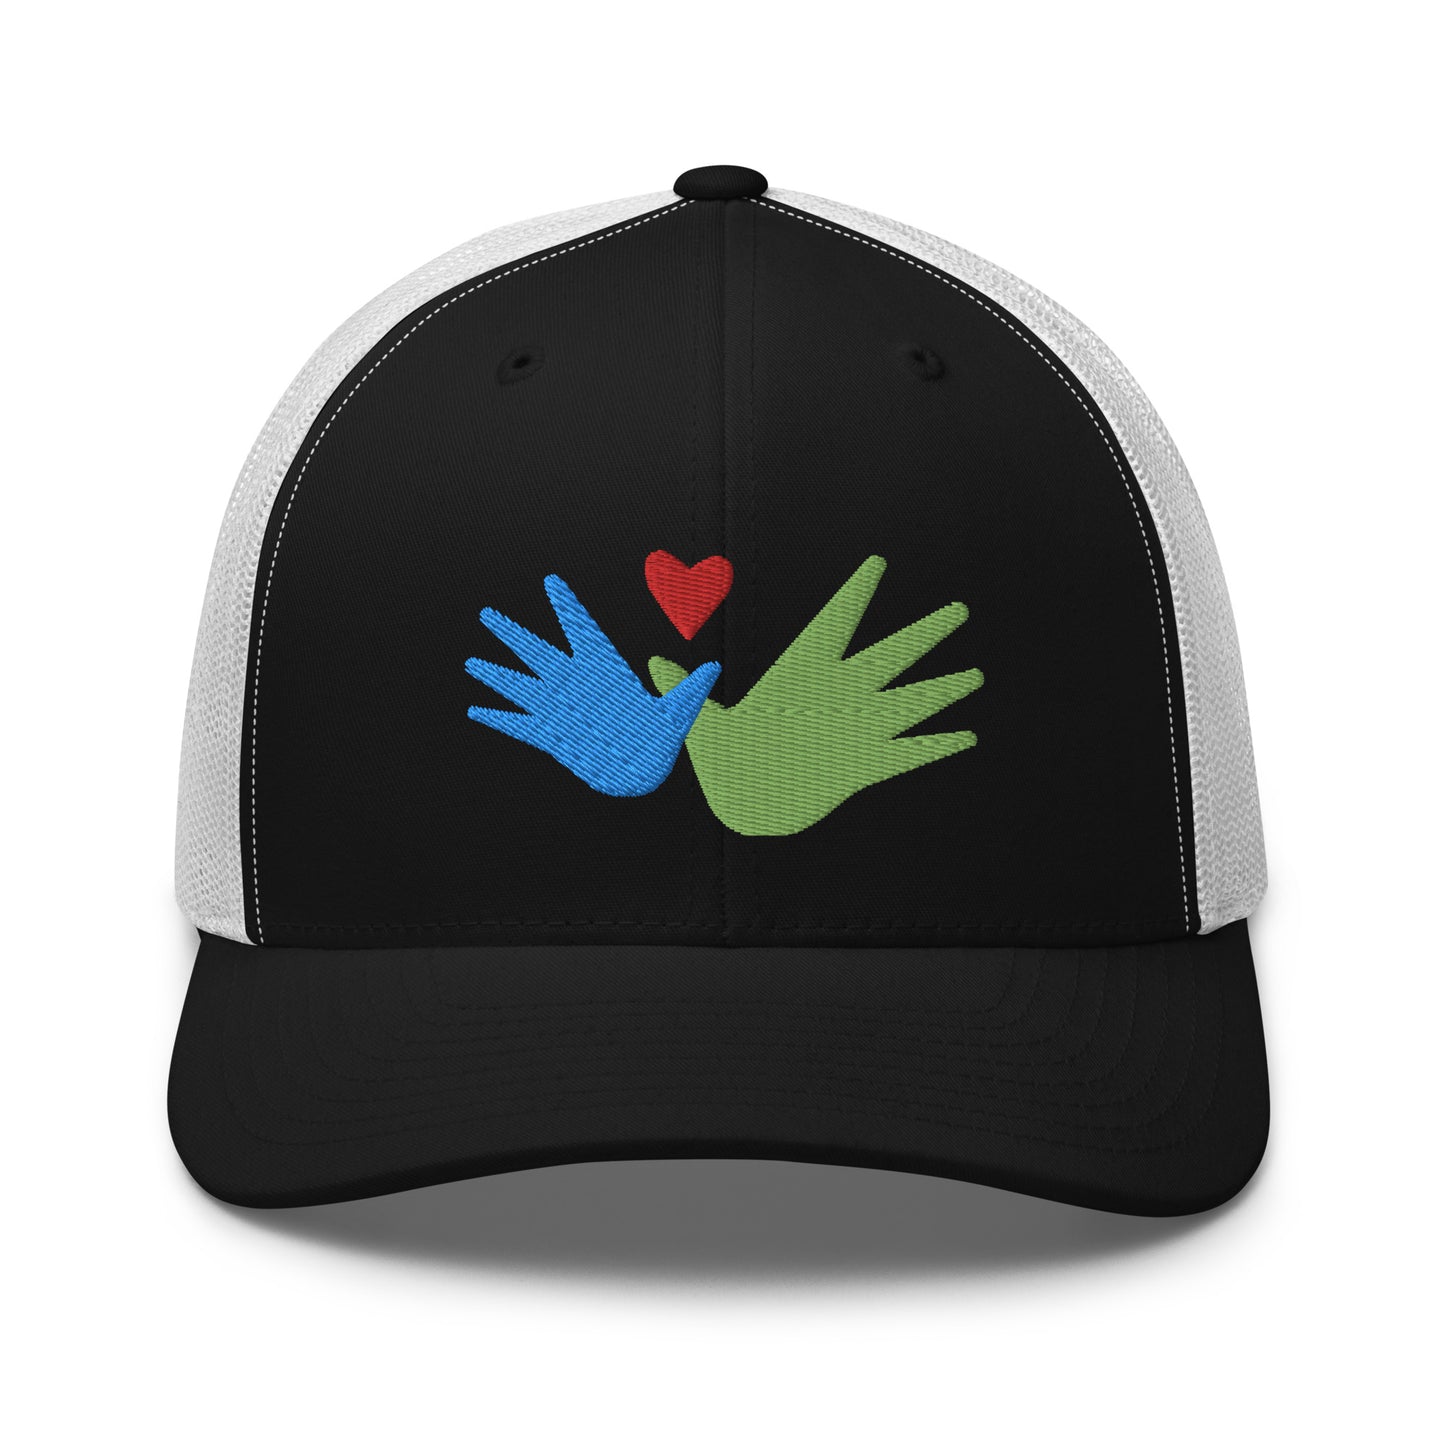 Williams Syndrome Association — 5 Panel Trucker Hat